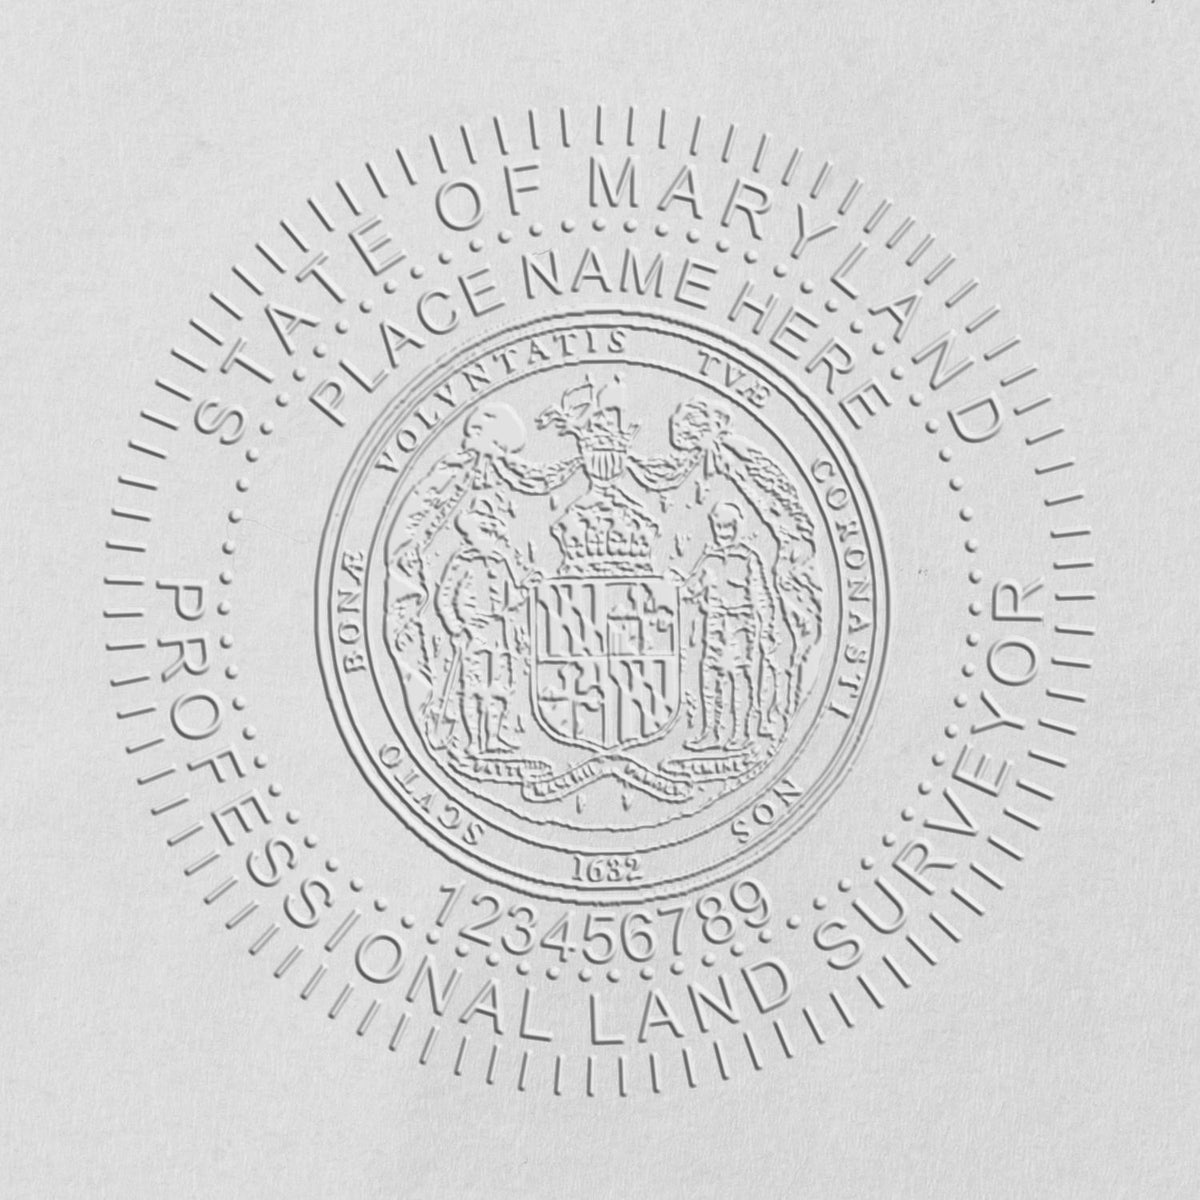 An alternative view of the Heavy Duty Cast Iron Maryland Land Surveyor Seal Embosser stamped on a sheet of paper showing the image in use